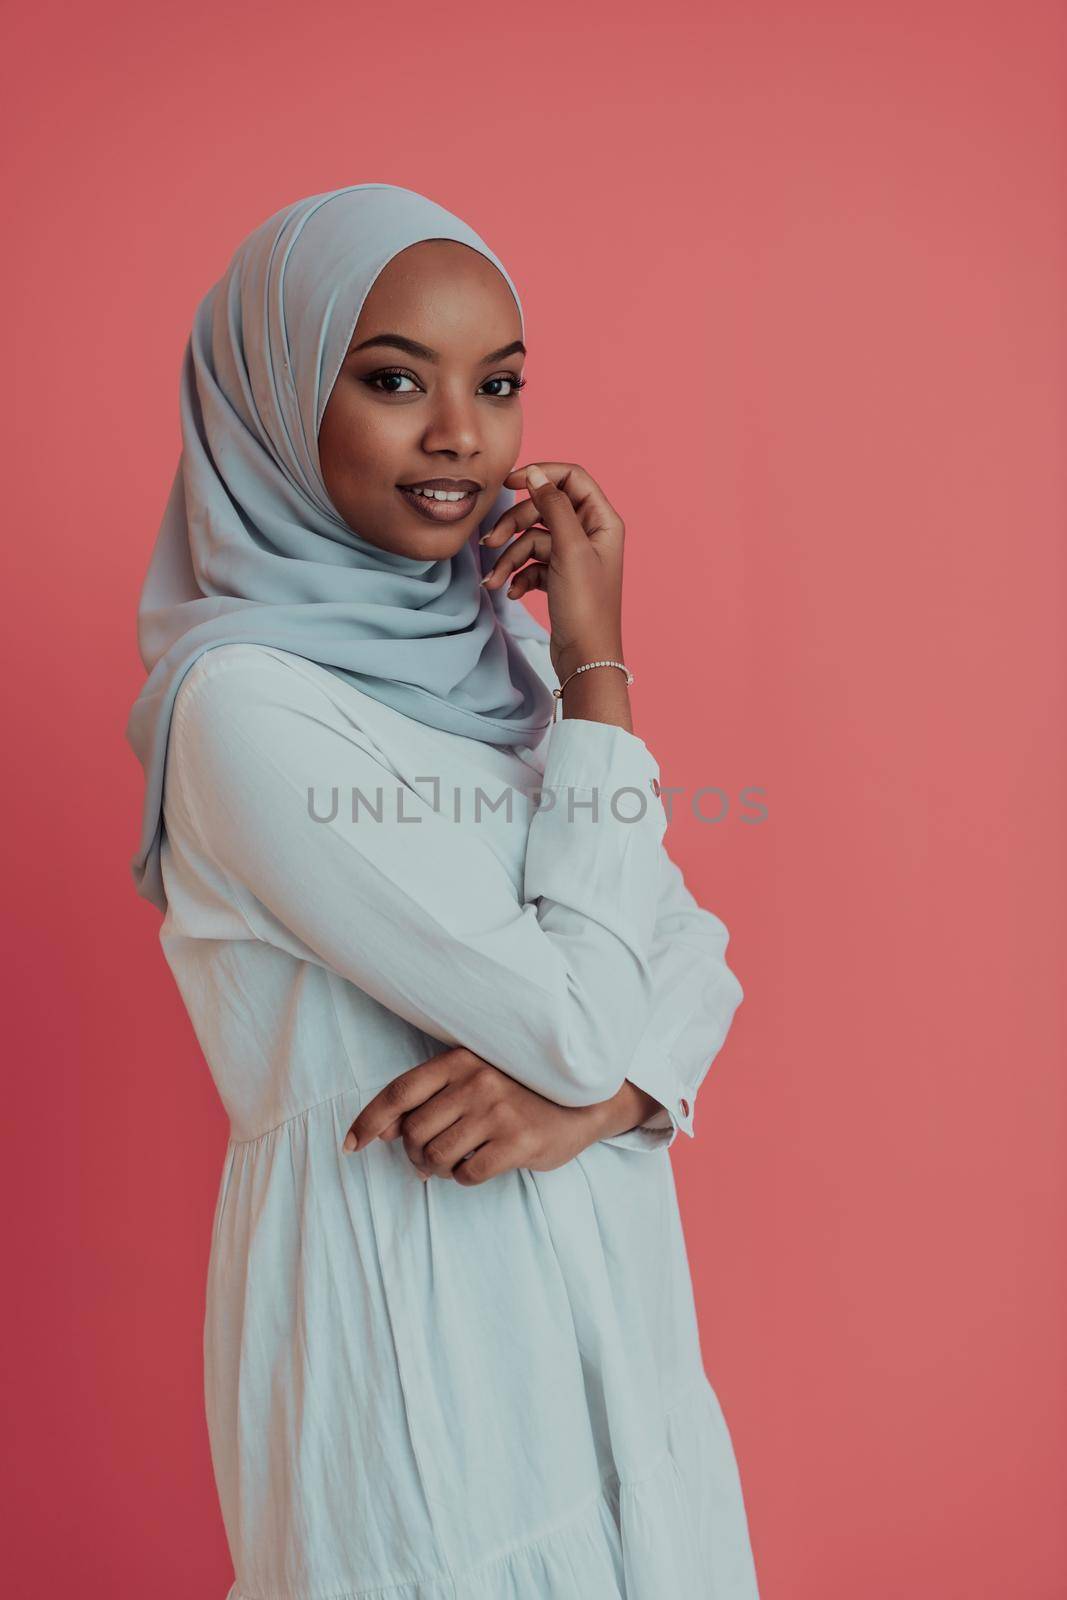 Portrait of young modern Muslim afro beauty wearing traditional Islamic clothes on plastic pink background. Selective focus. High-quality photo